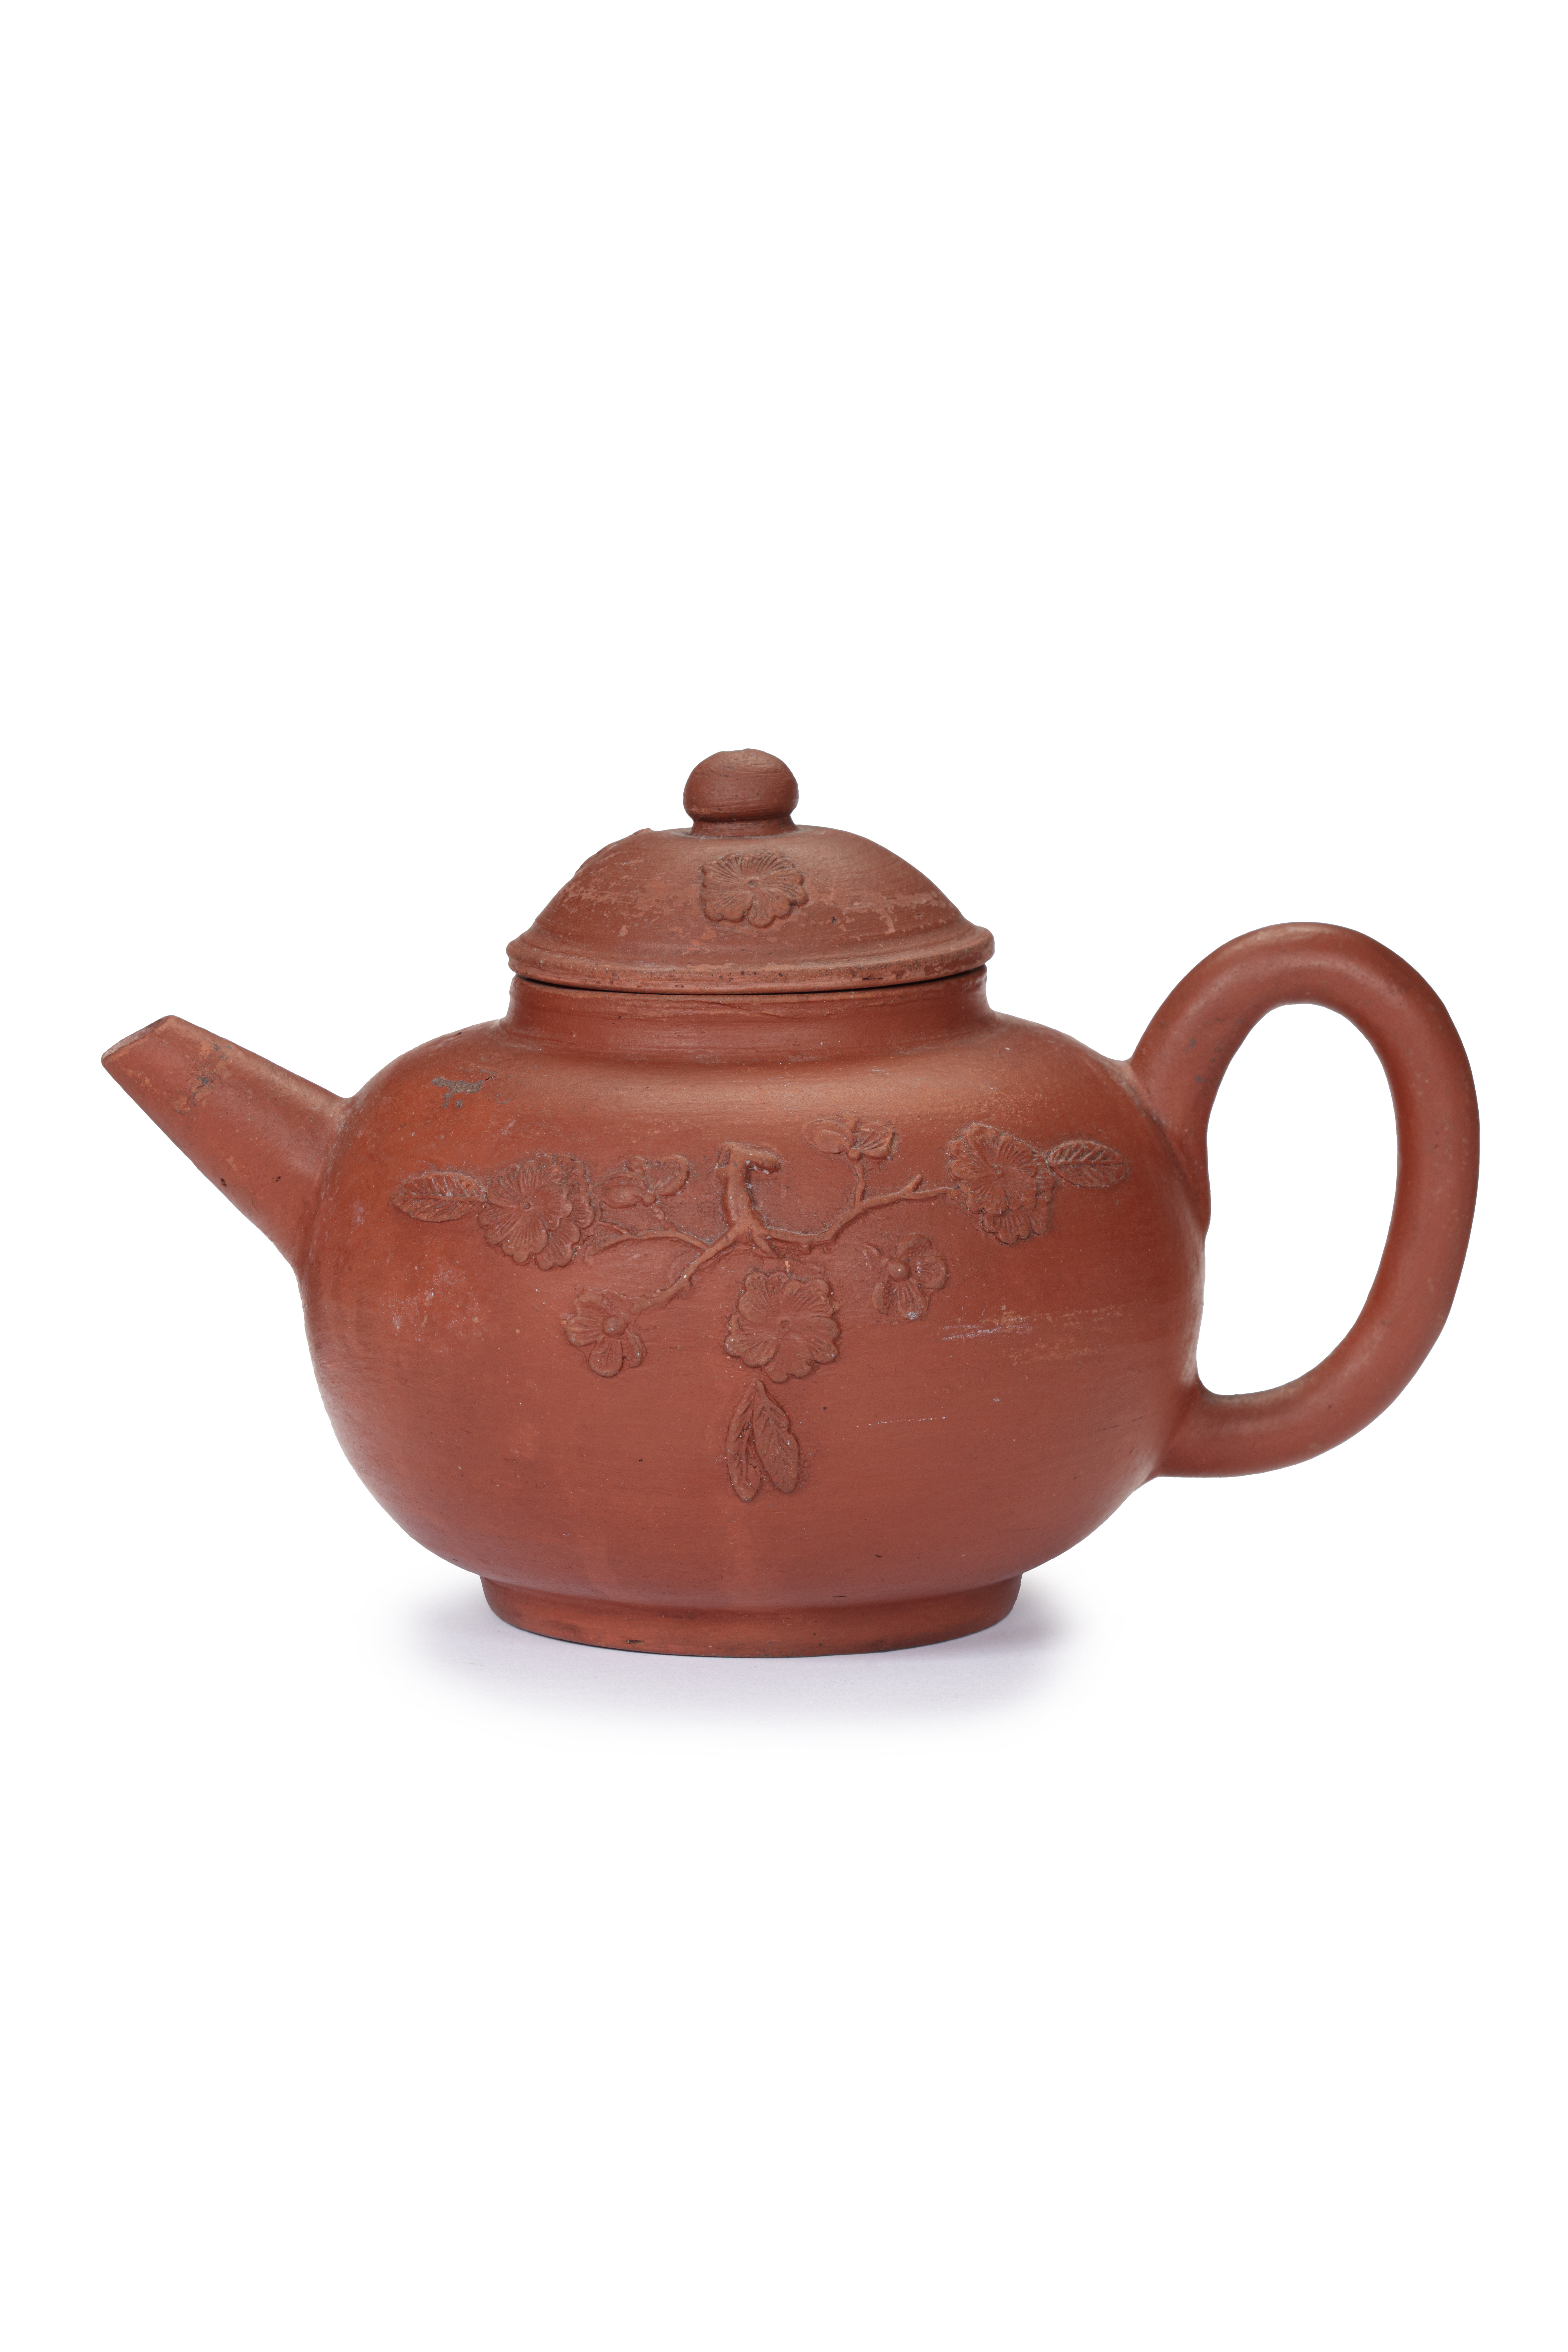 D2209. Red Stoneware Teapot and Cover – Aronson Antiquairs of